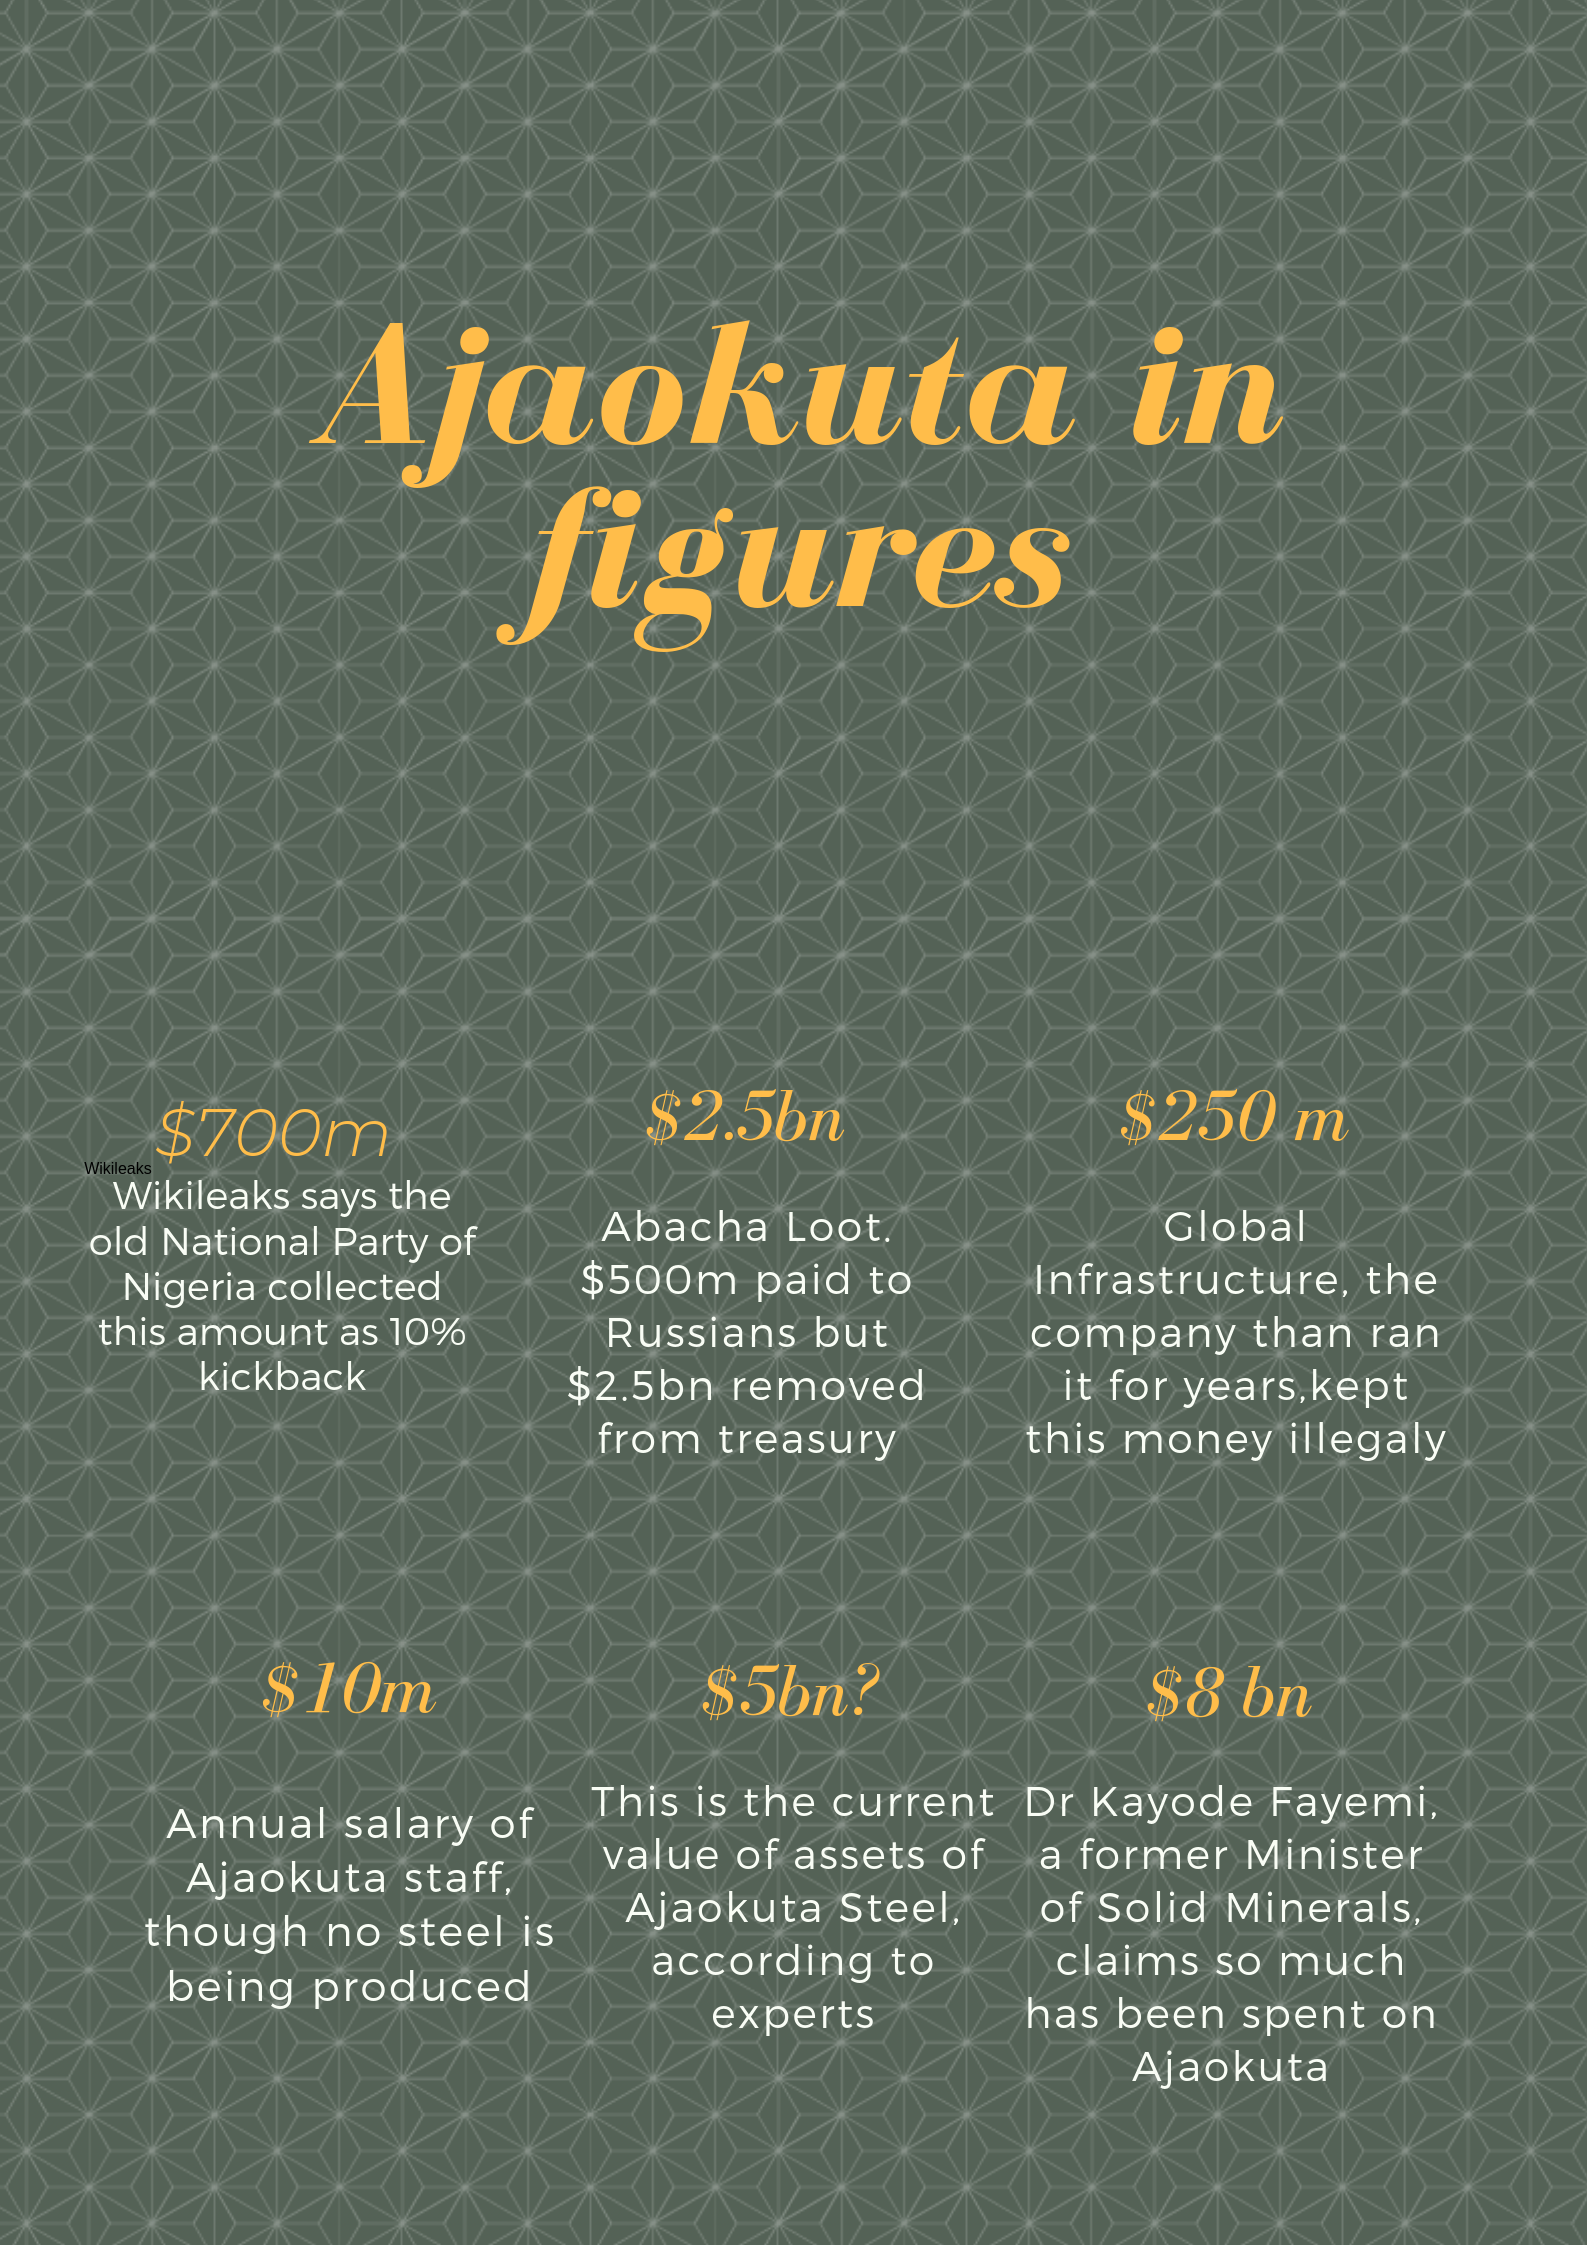 Vultures of steel: Ajaokuta where corruption is the system